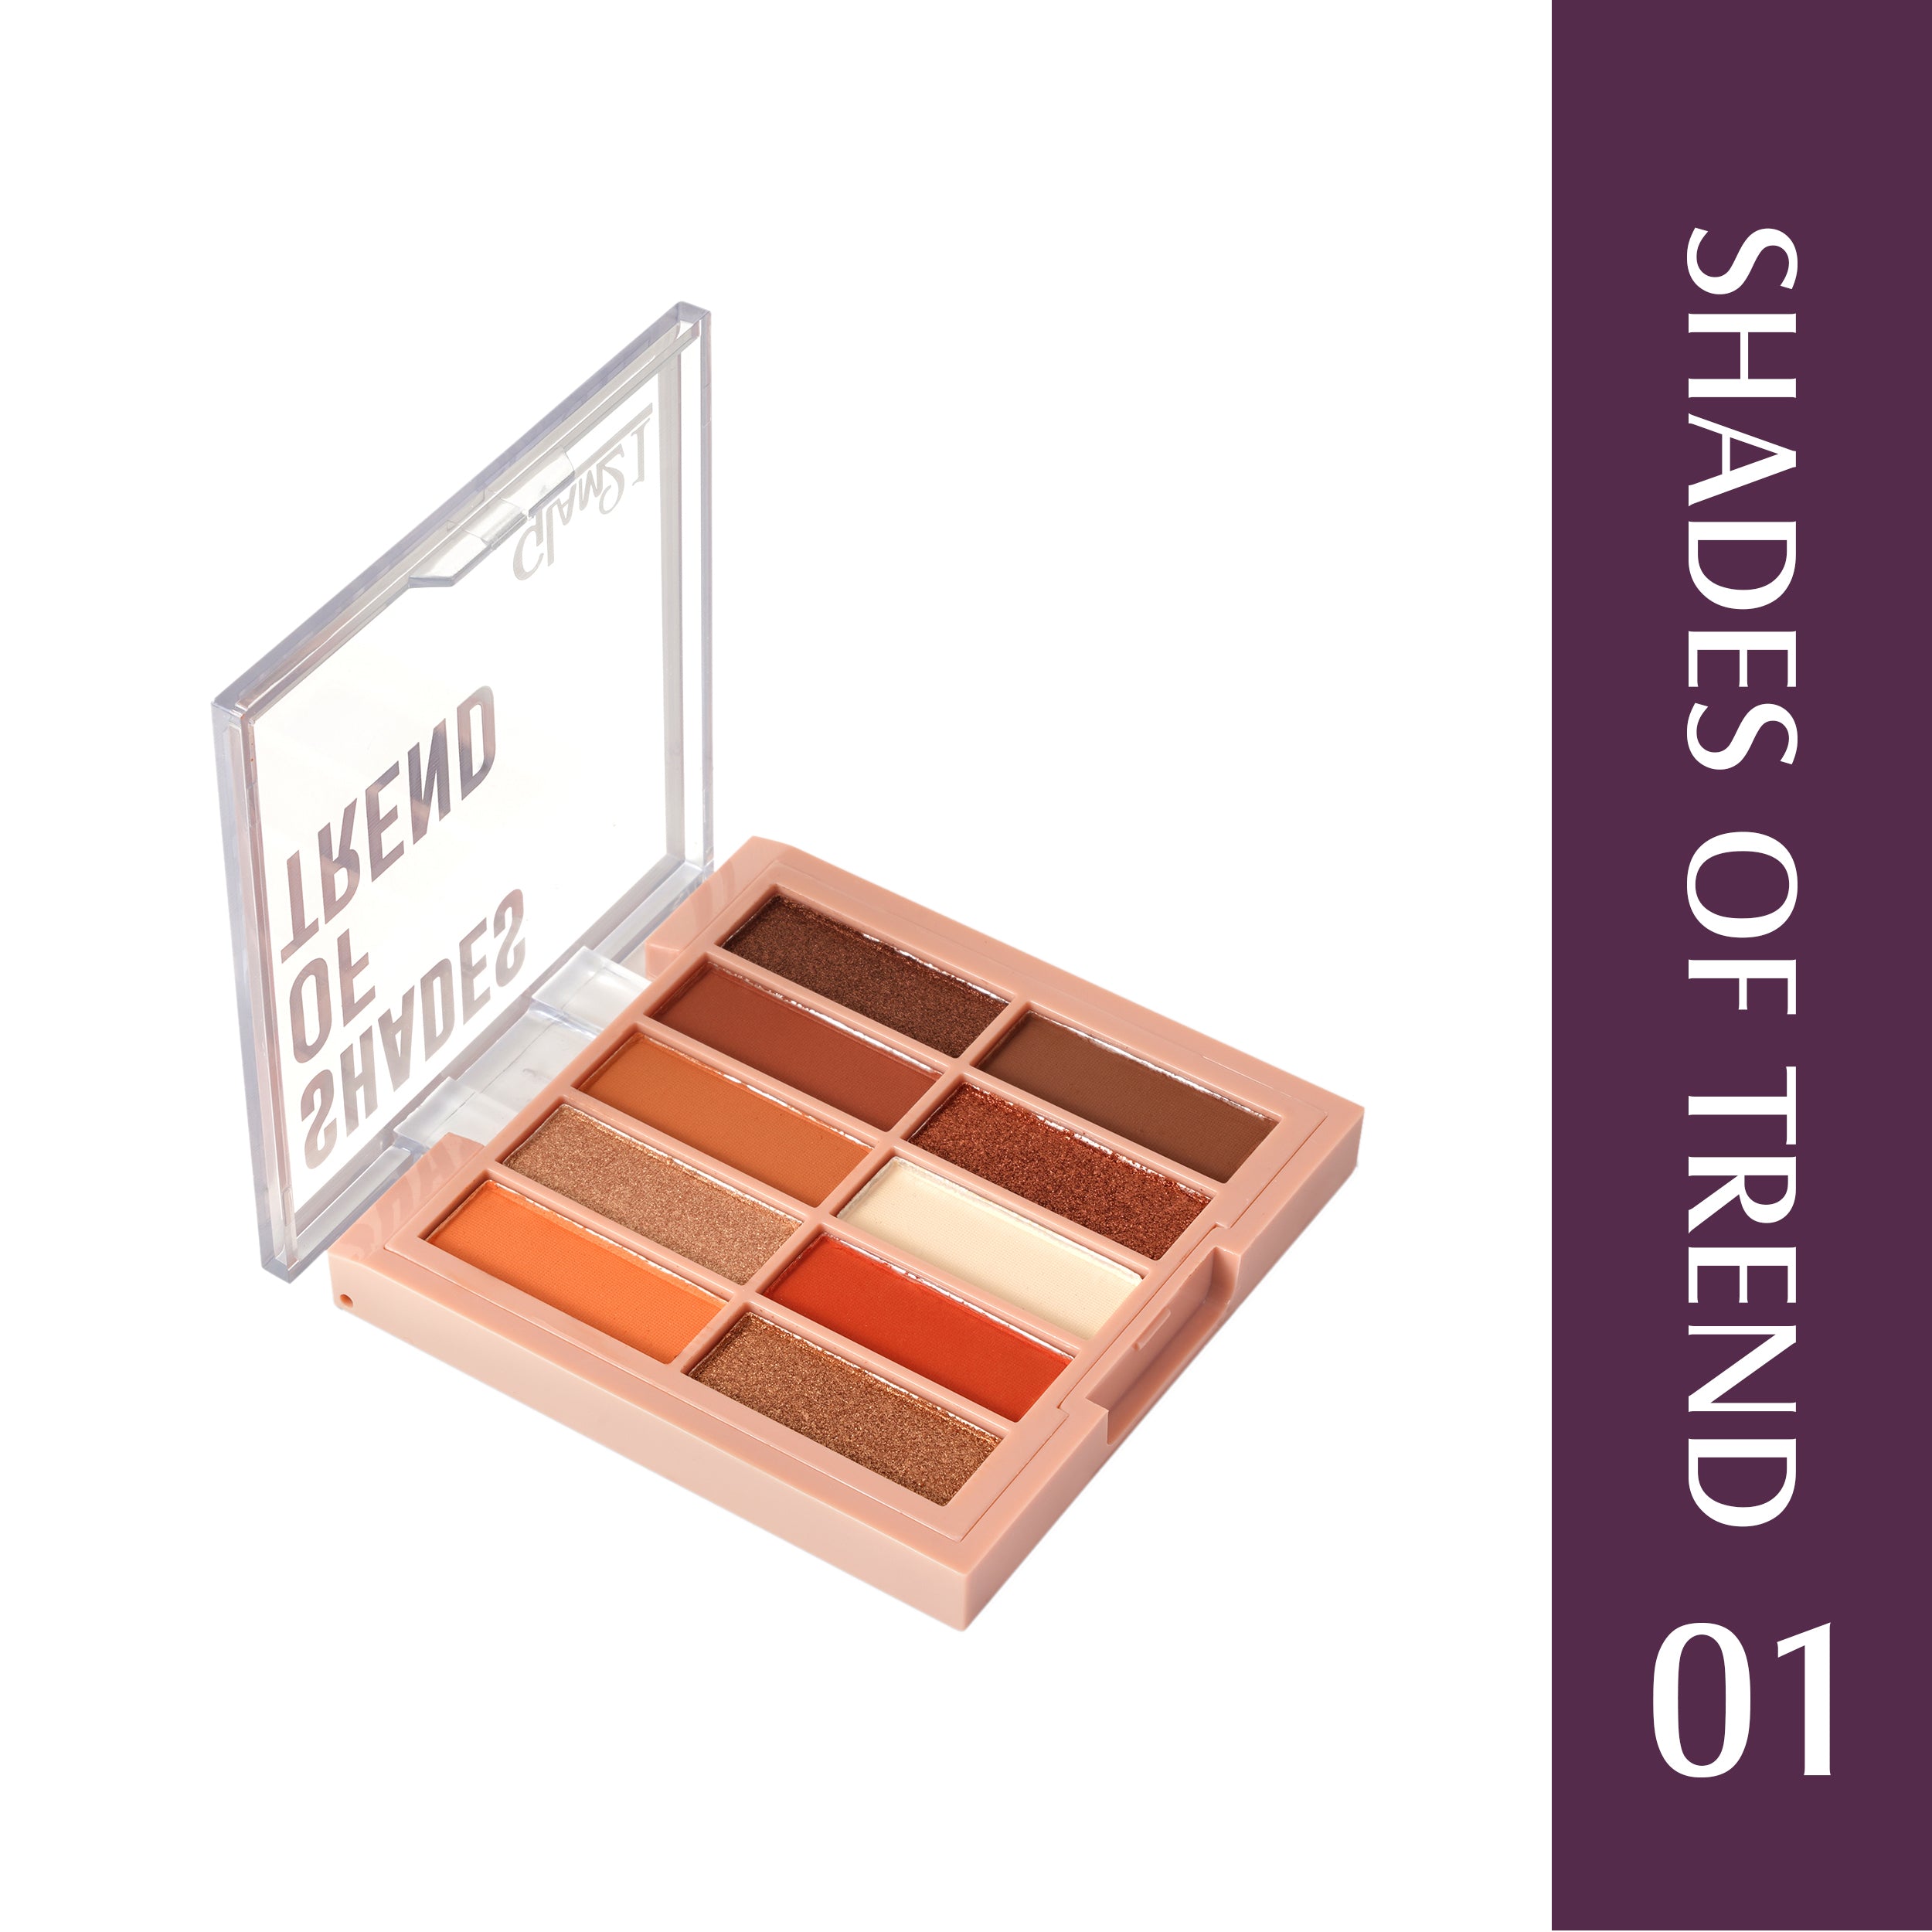 Glam21 Shades of Trend Eyeshadow Palette 10 Highly Pigmented Shades Shimmery Finish, 12gm Shade -01